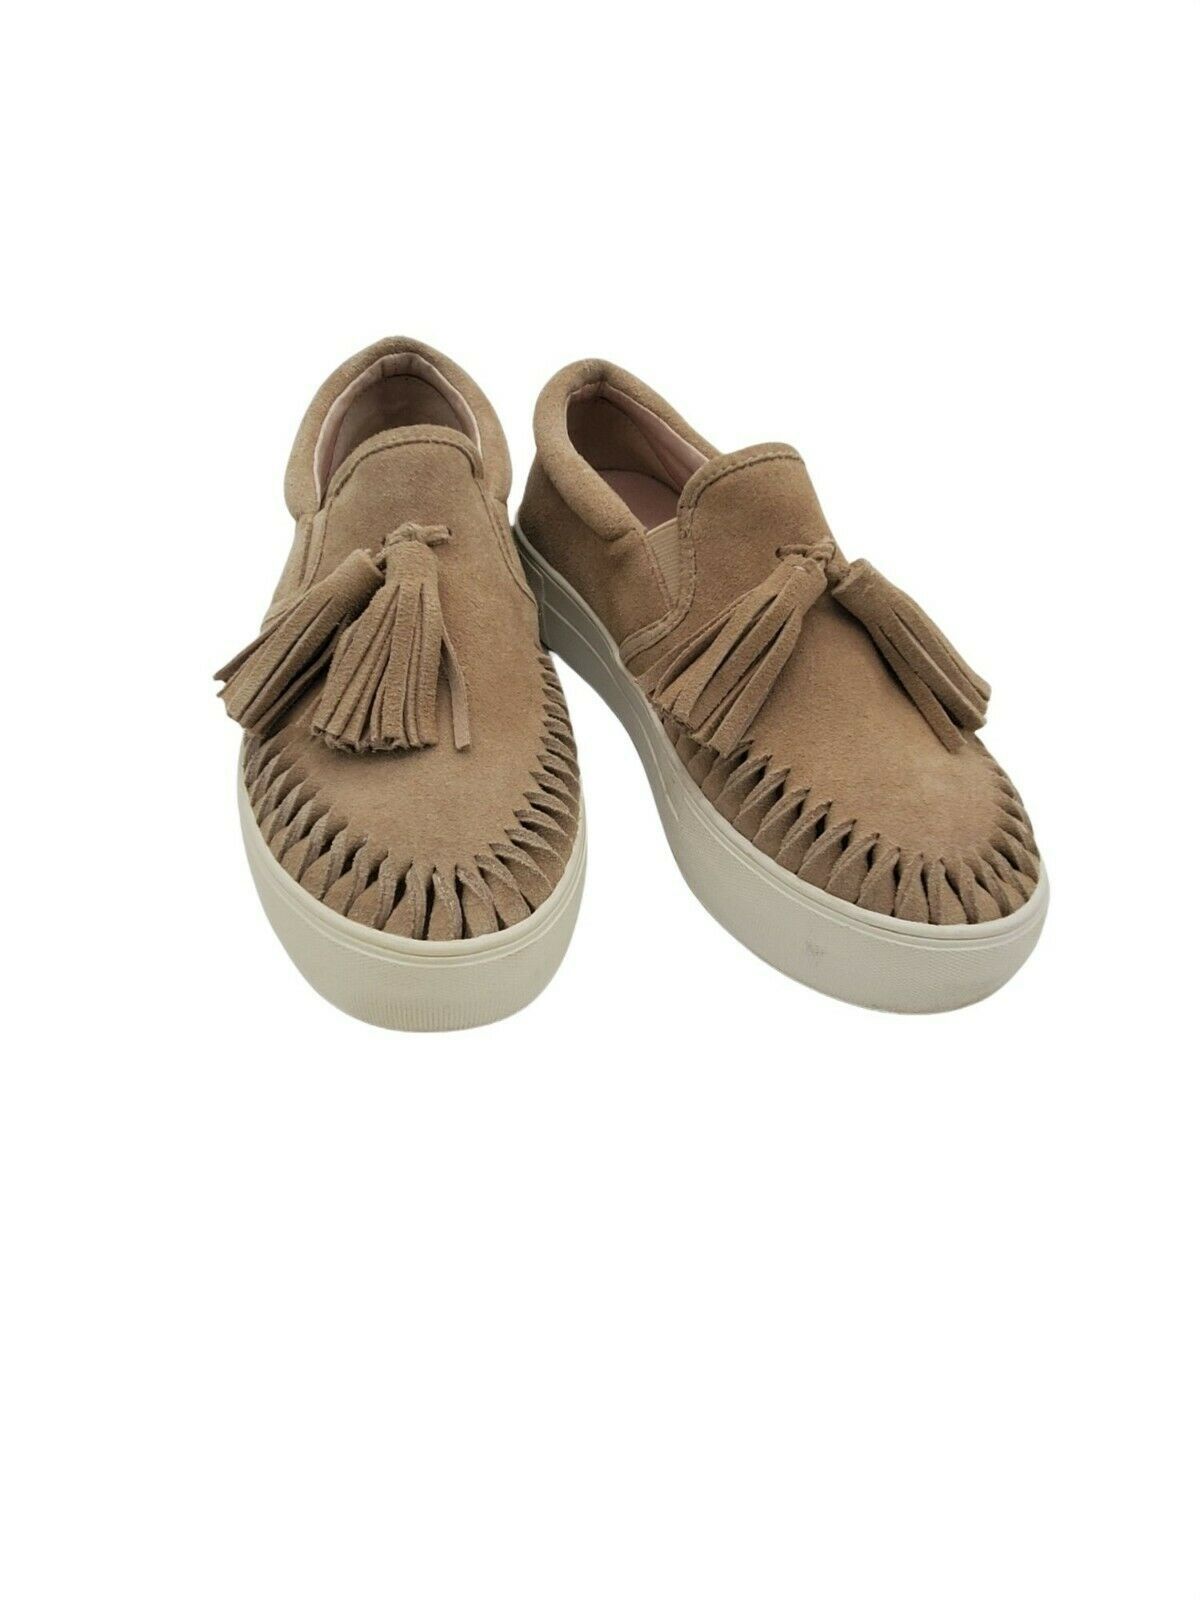 Primary image for J/Slides Shoes 6 Womens Tan Slip On Tassles Boho Round Toe Classic Casual Walkin